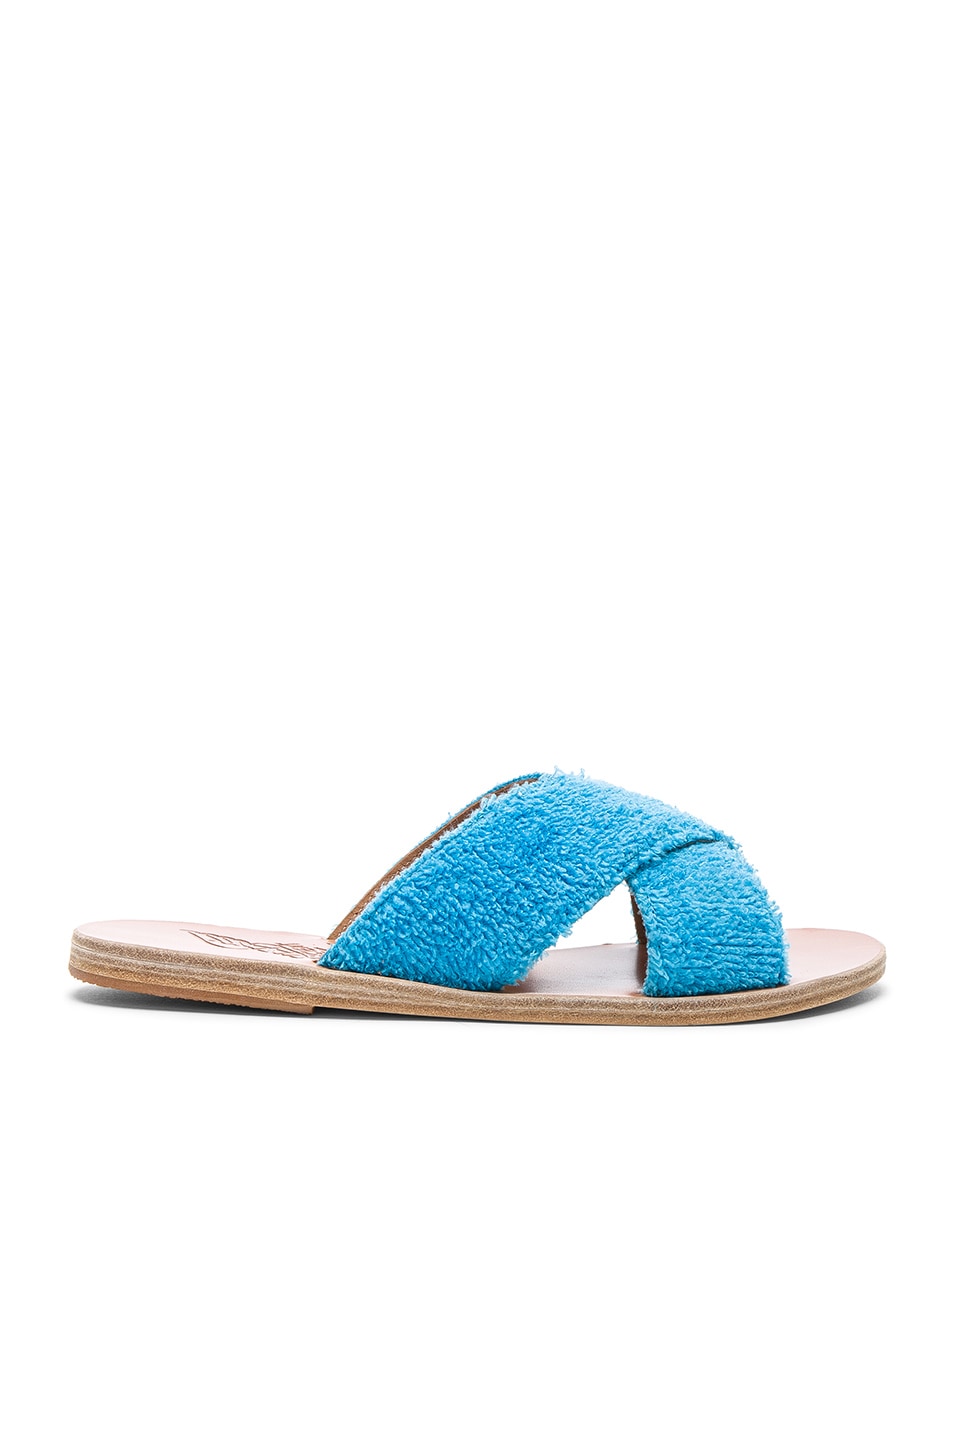 Image 1 of Ancient Greek Sandals Terry Cloth Thais Sandals in Turquoise